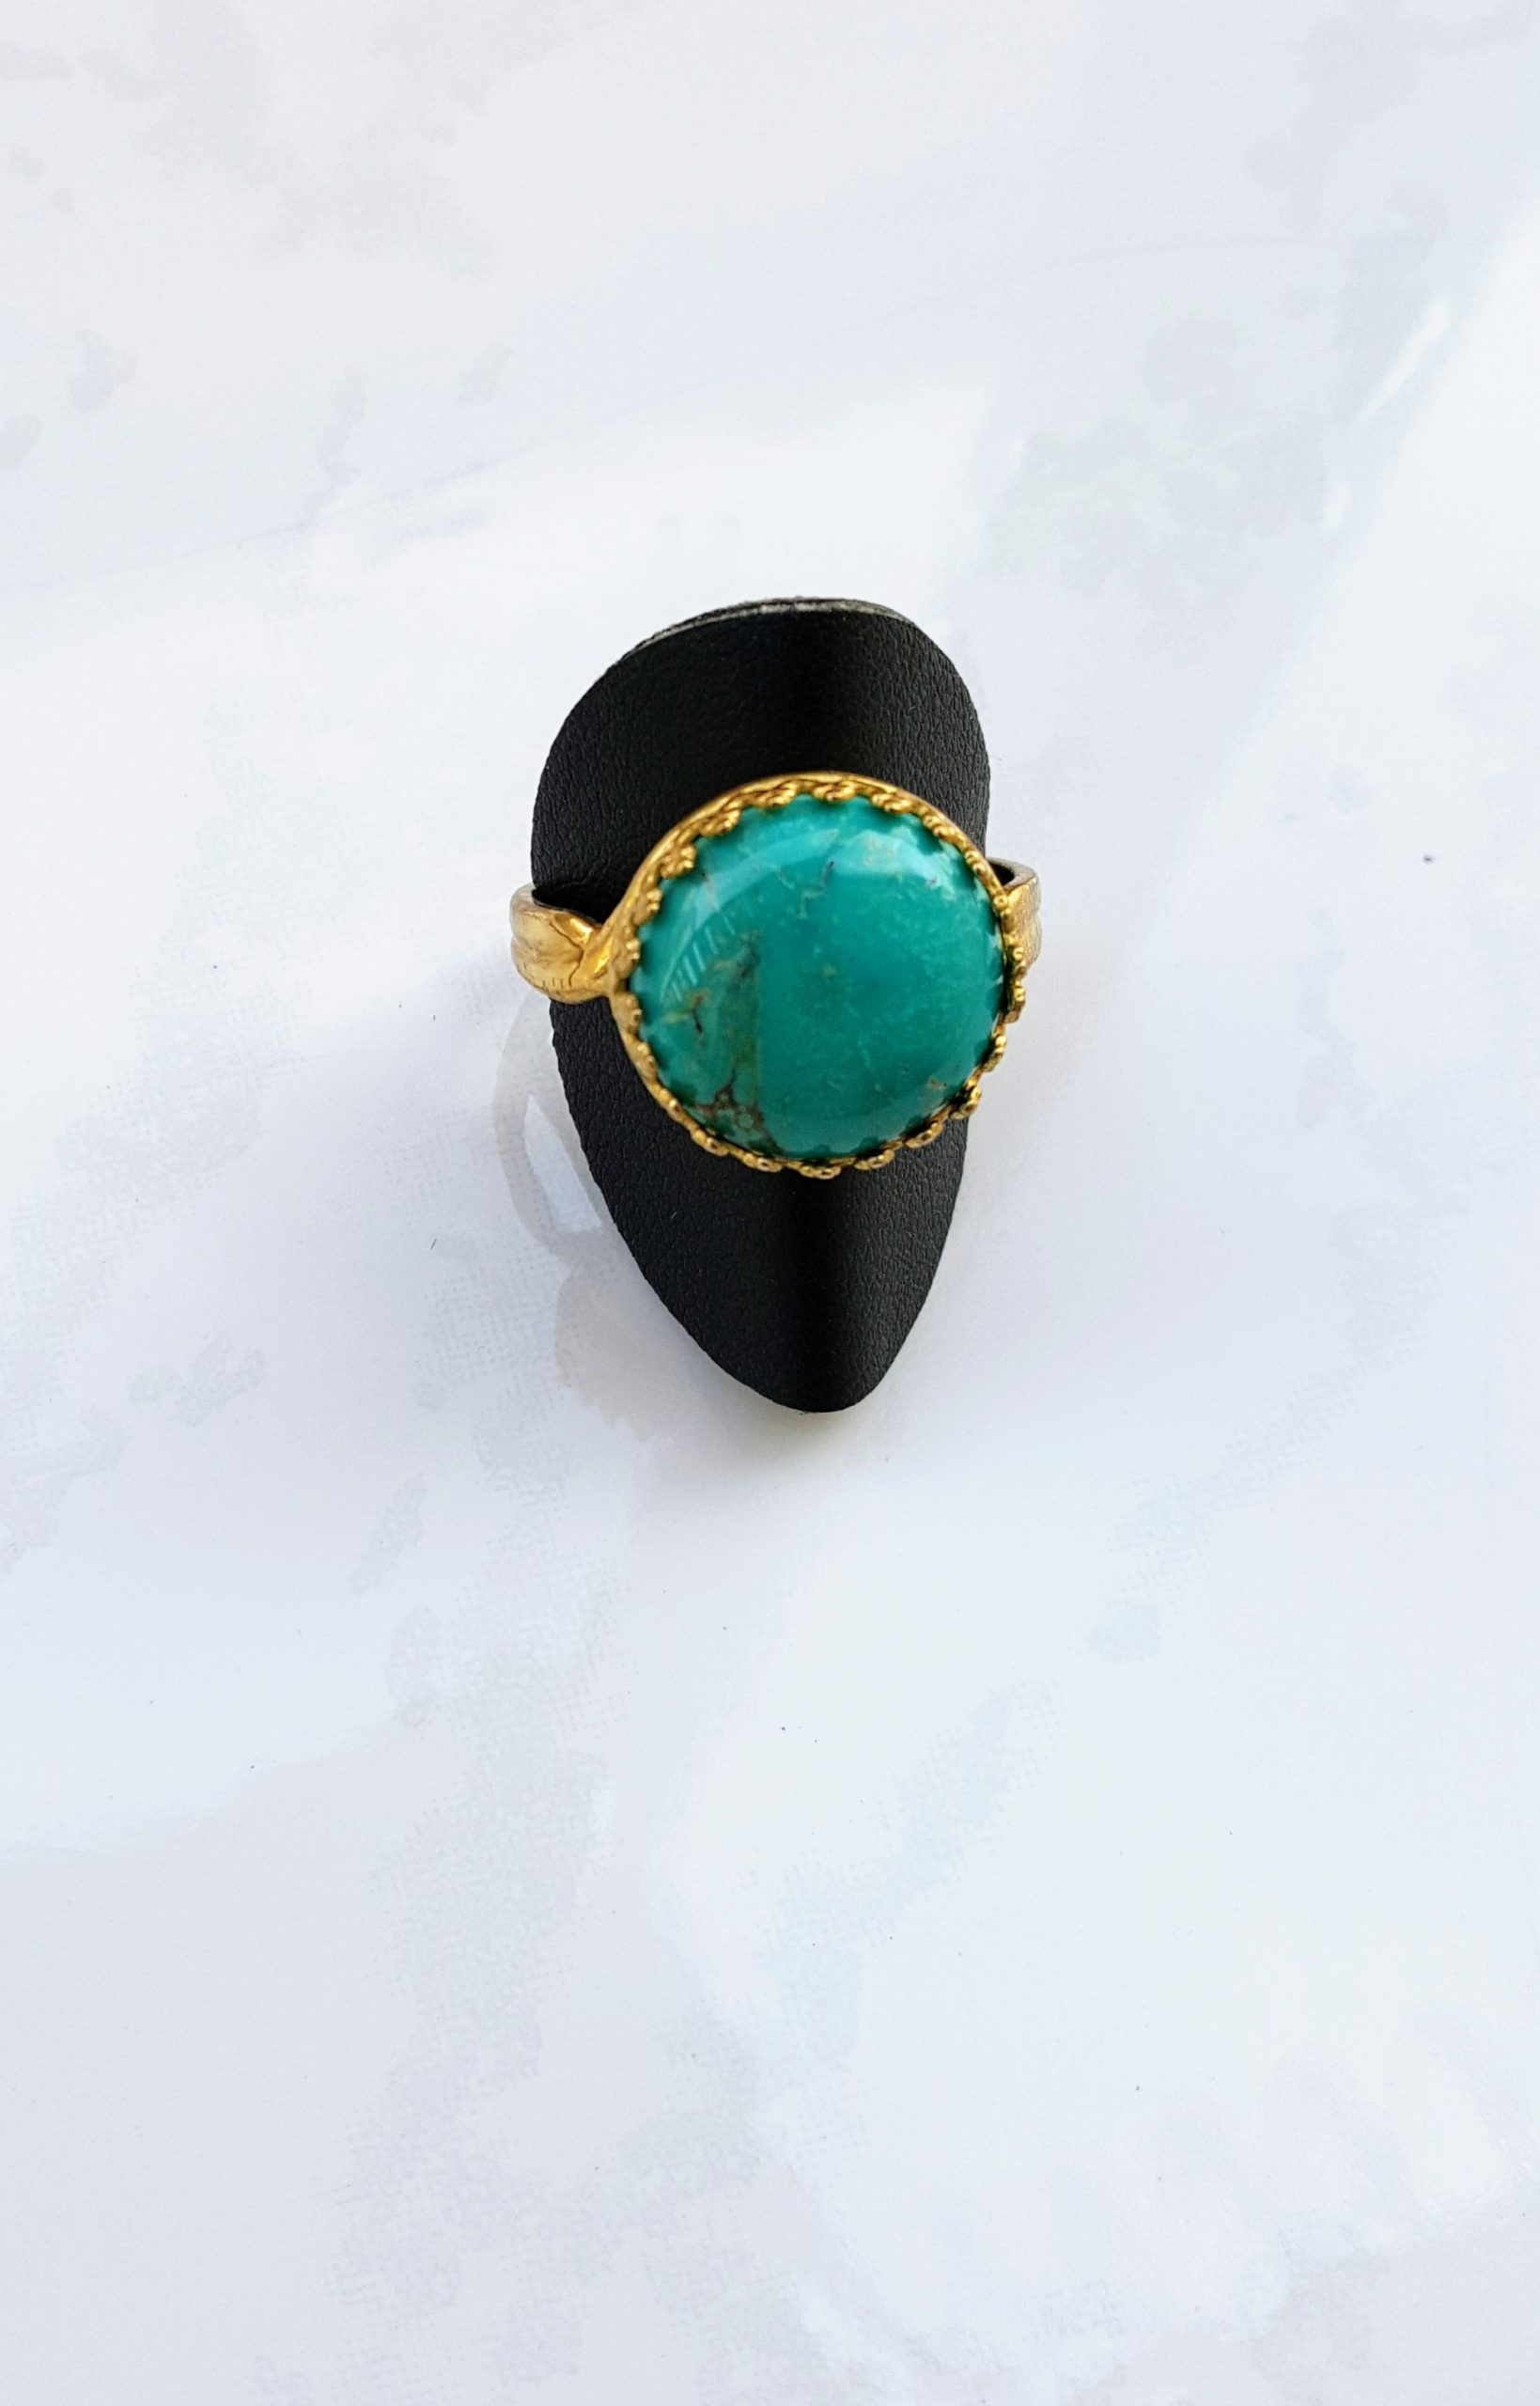 14K Gold And Turquoise Ring